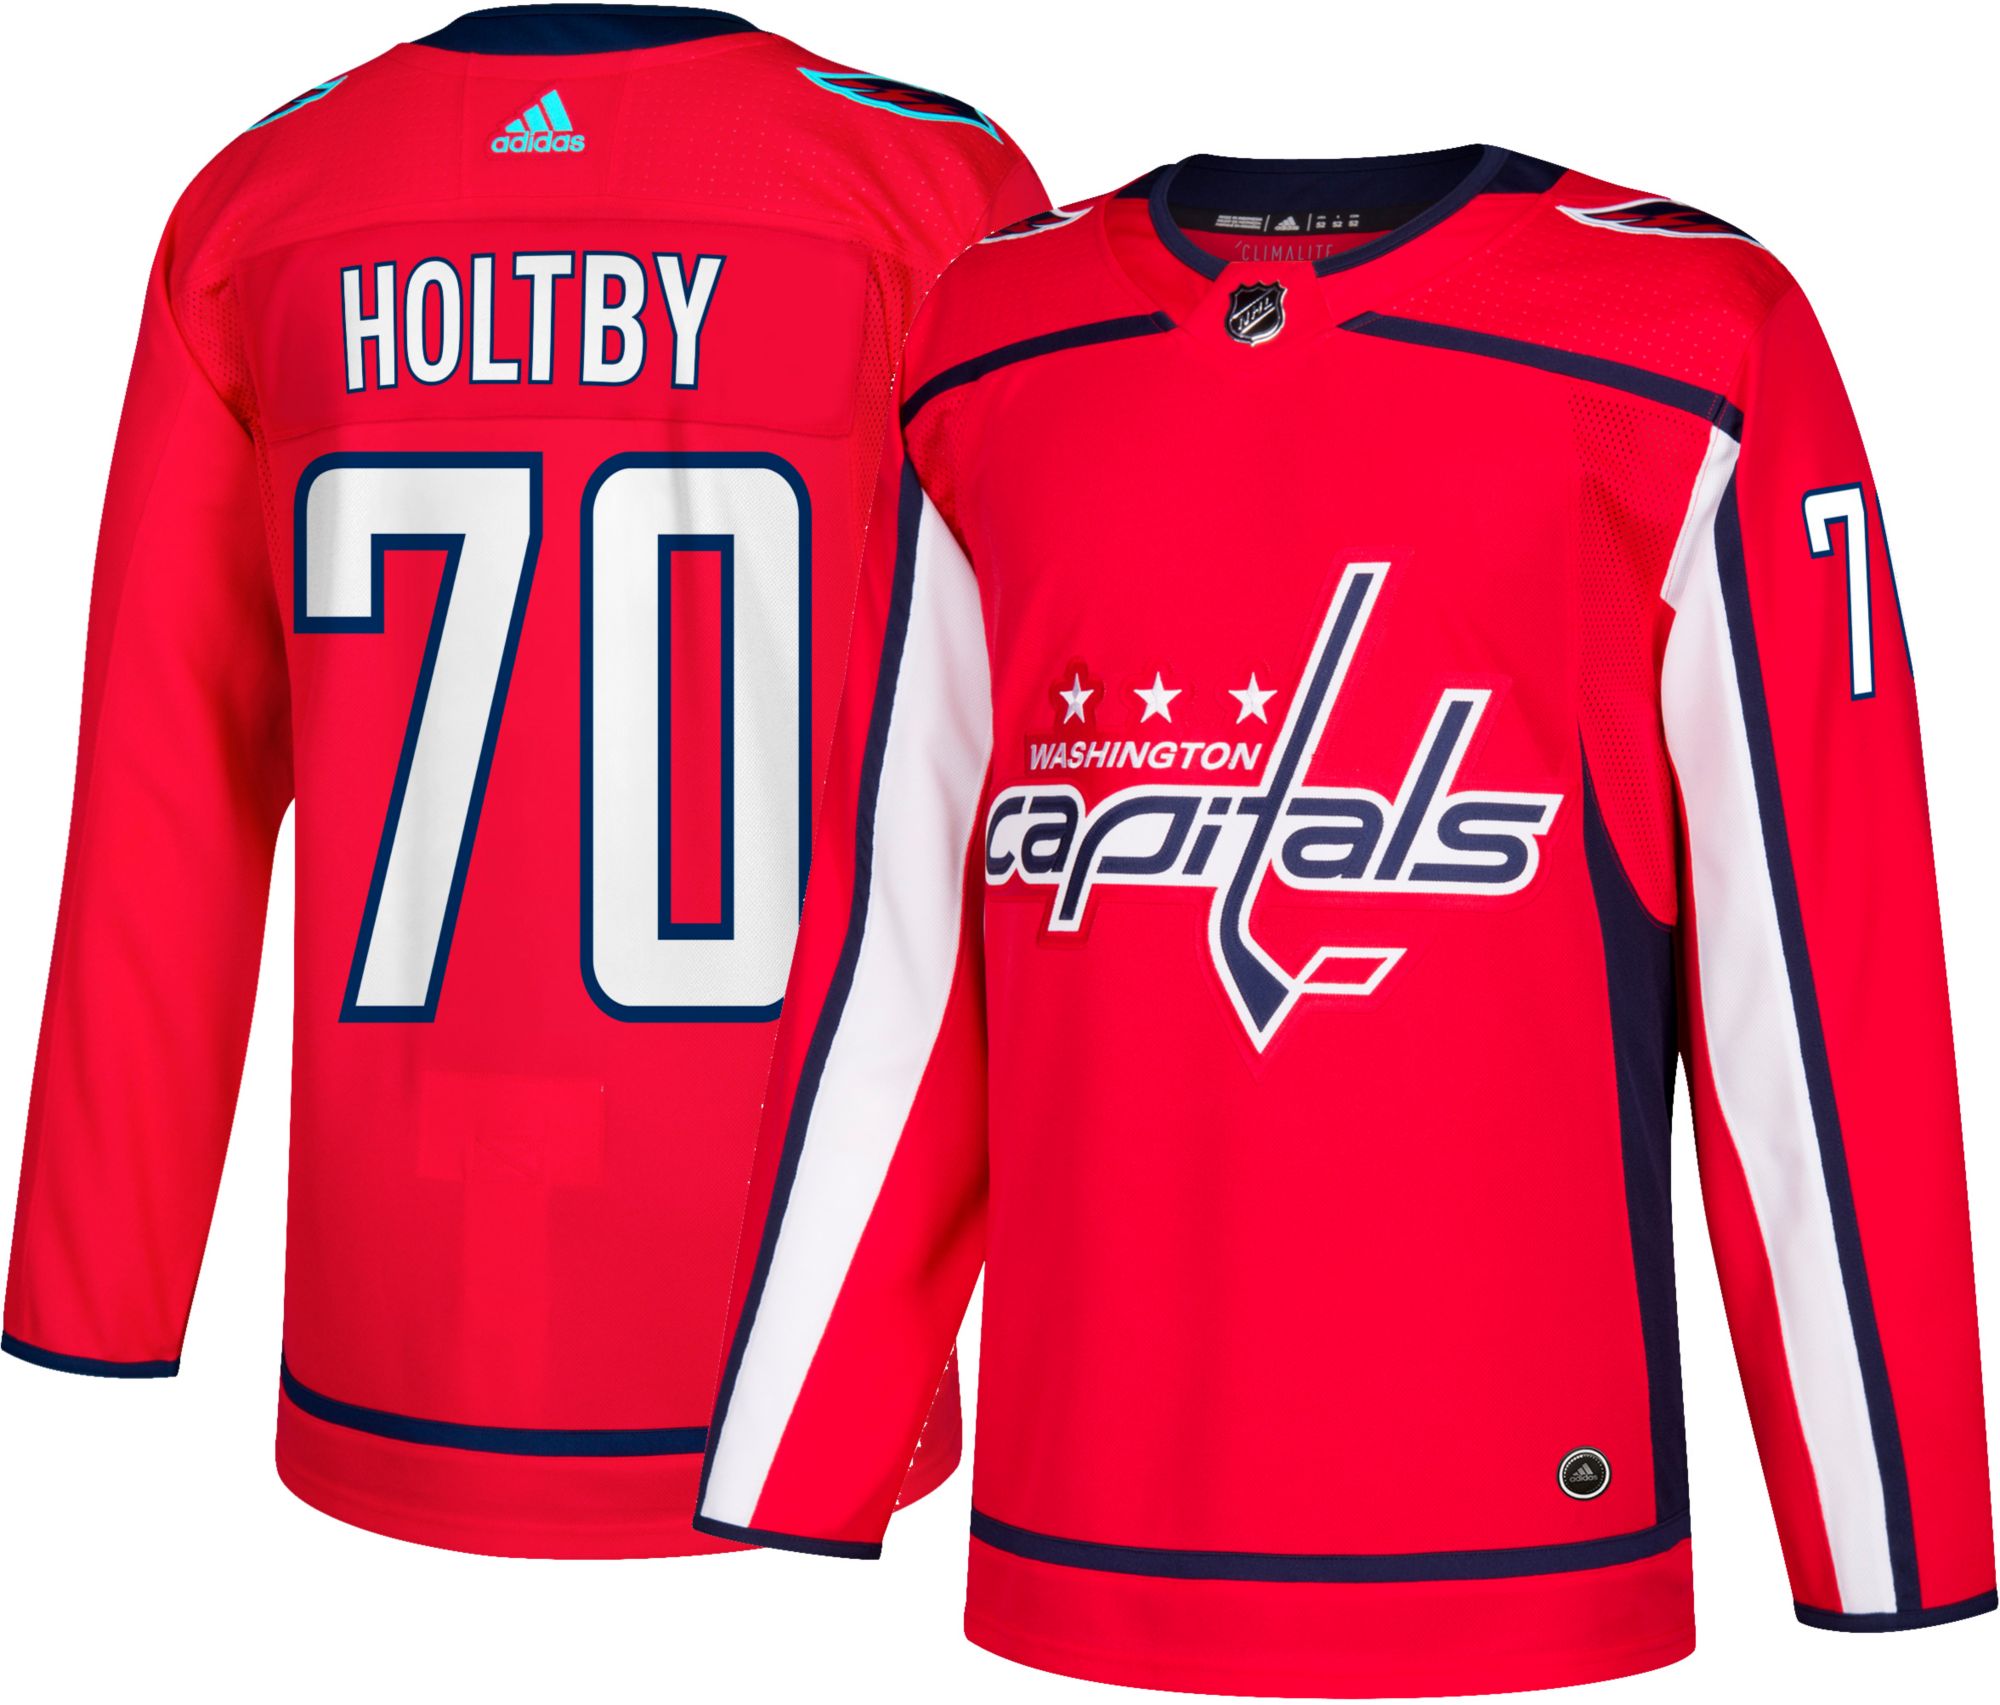 holtby shirt